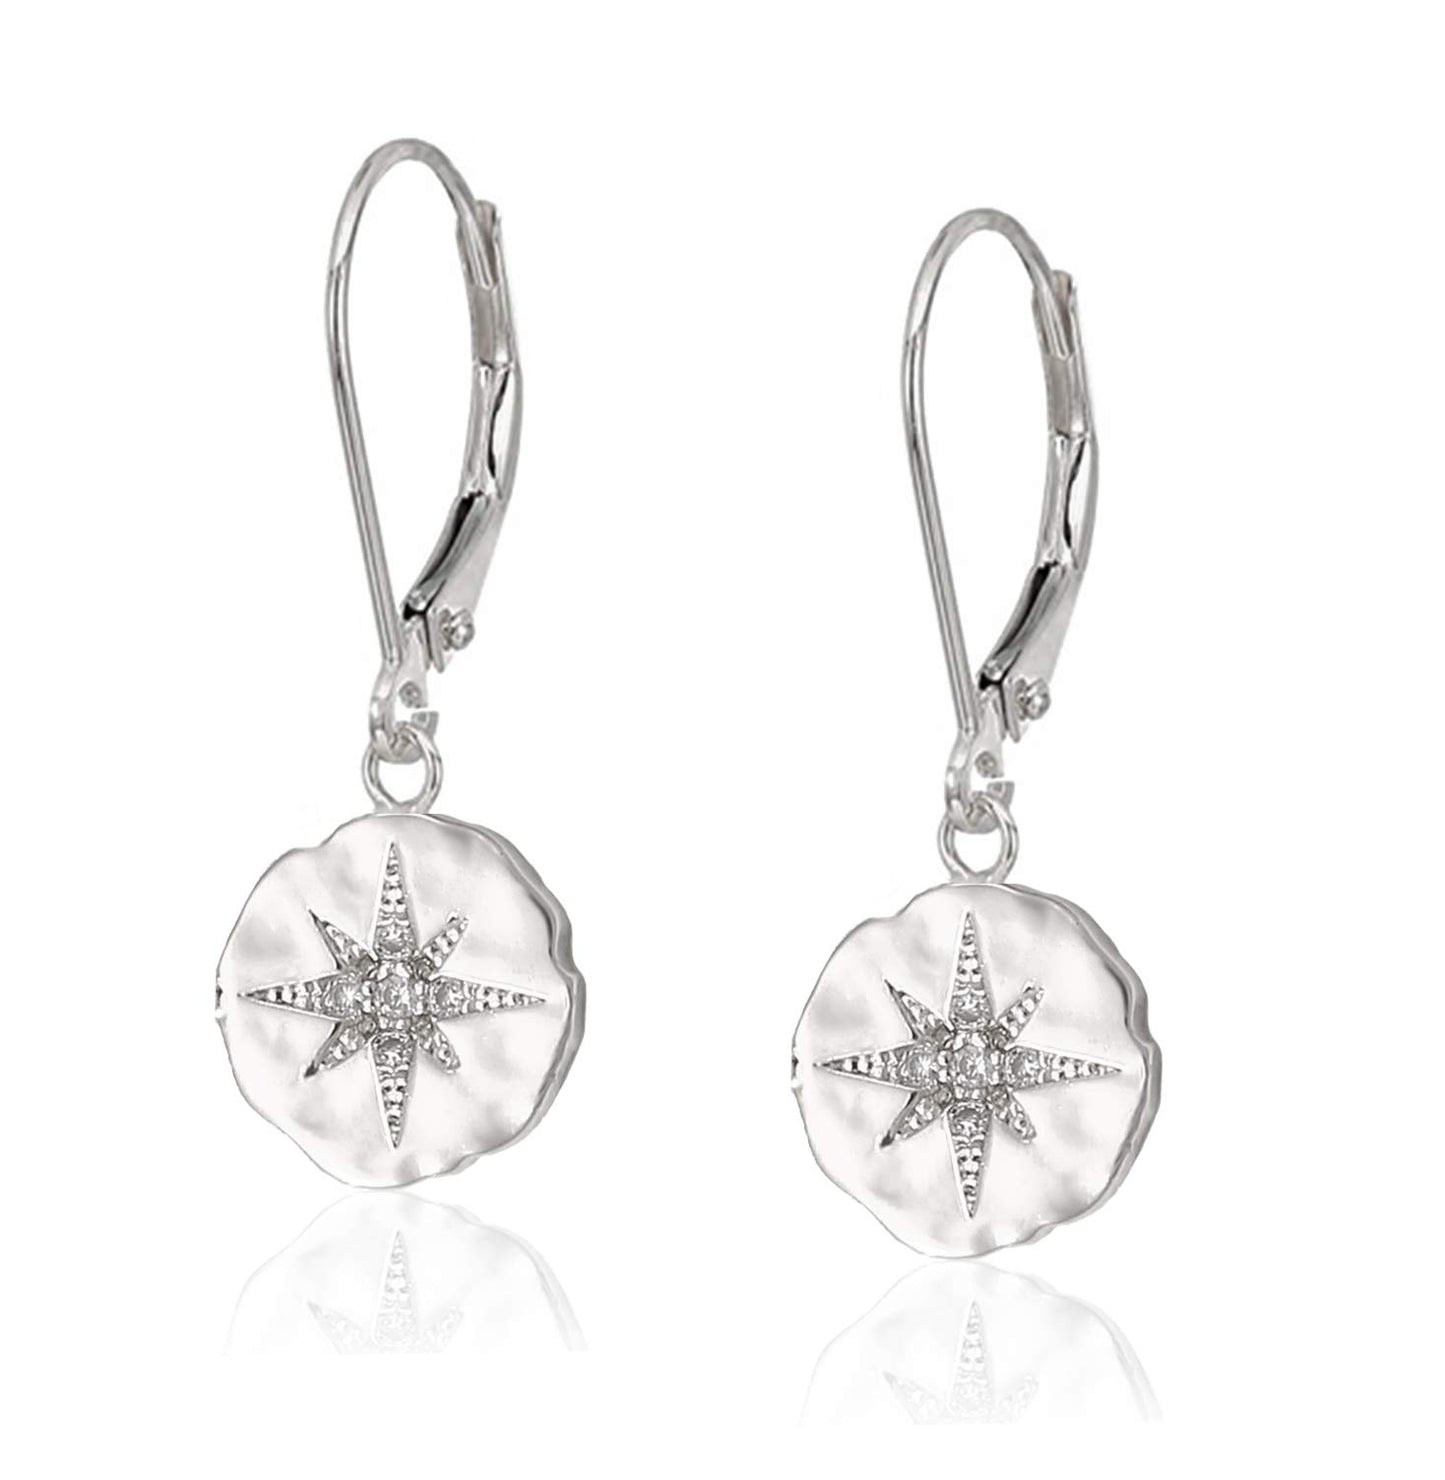 Retirement Gift for Women • Enjoy the Next Chapter • Diamond Starburst Earrings • Congratulations • You'll be Missed • Be Proud of the Difference You Have Made